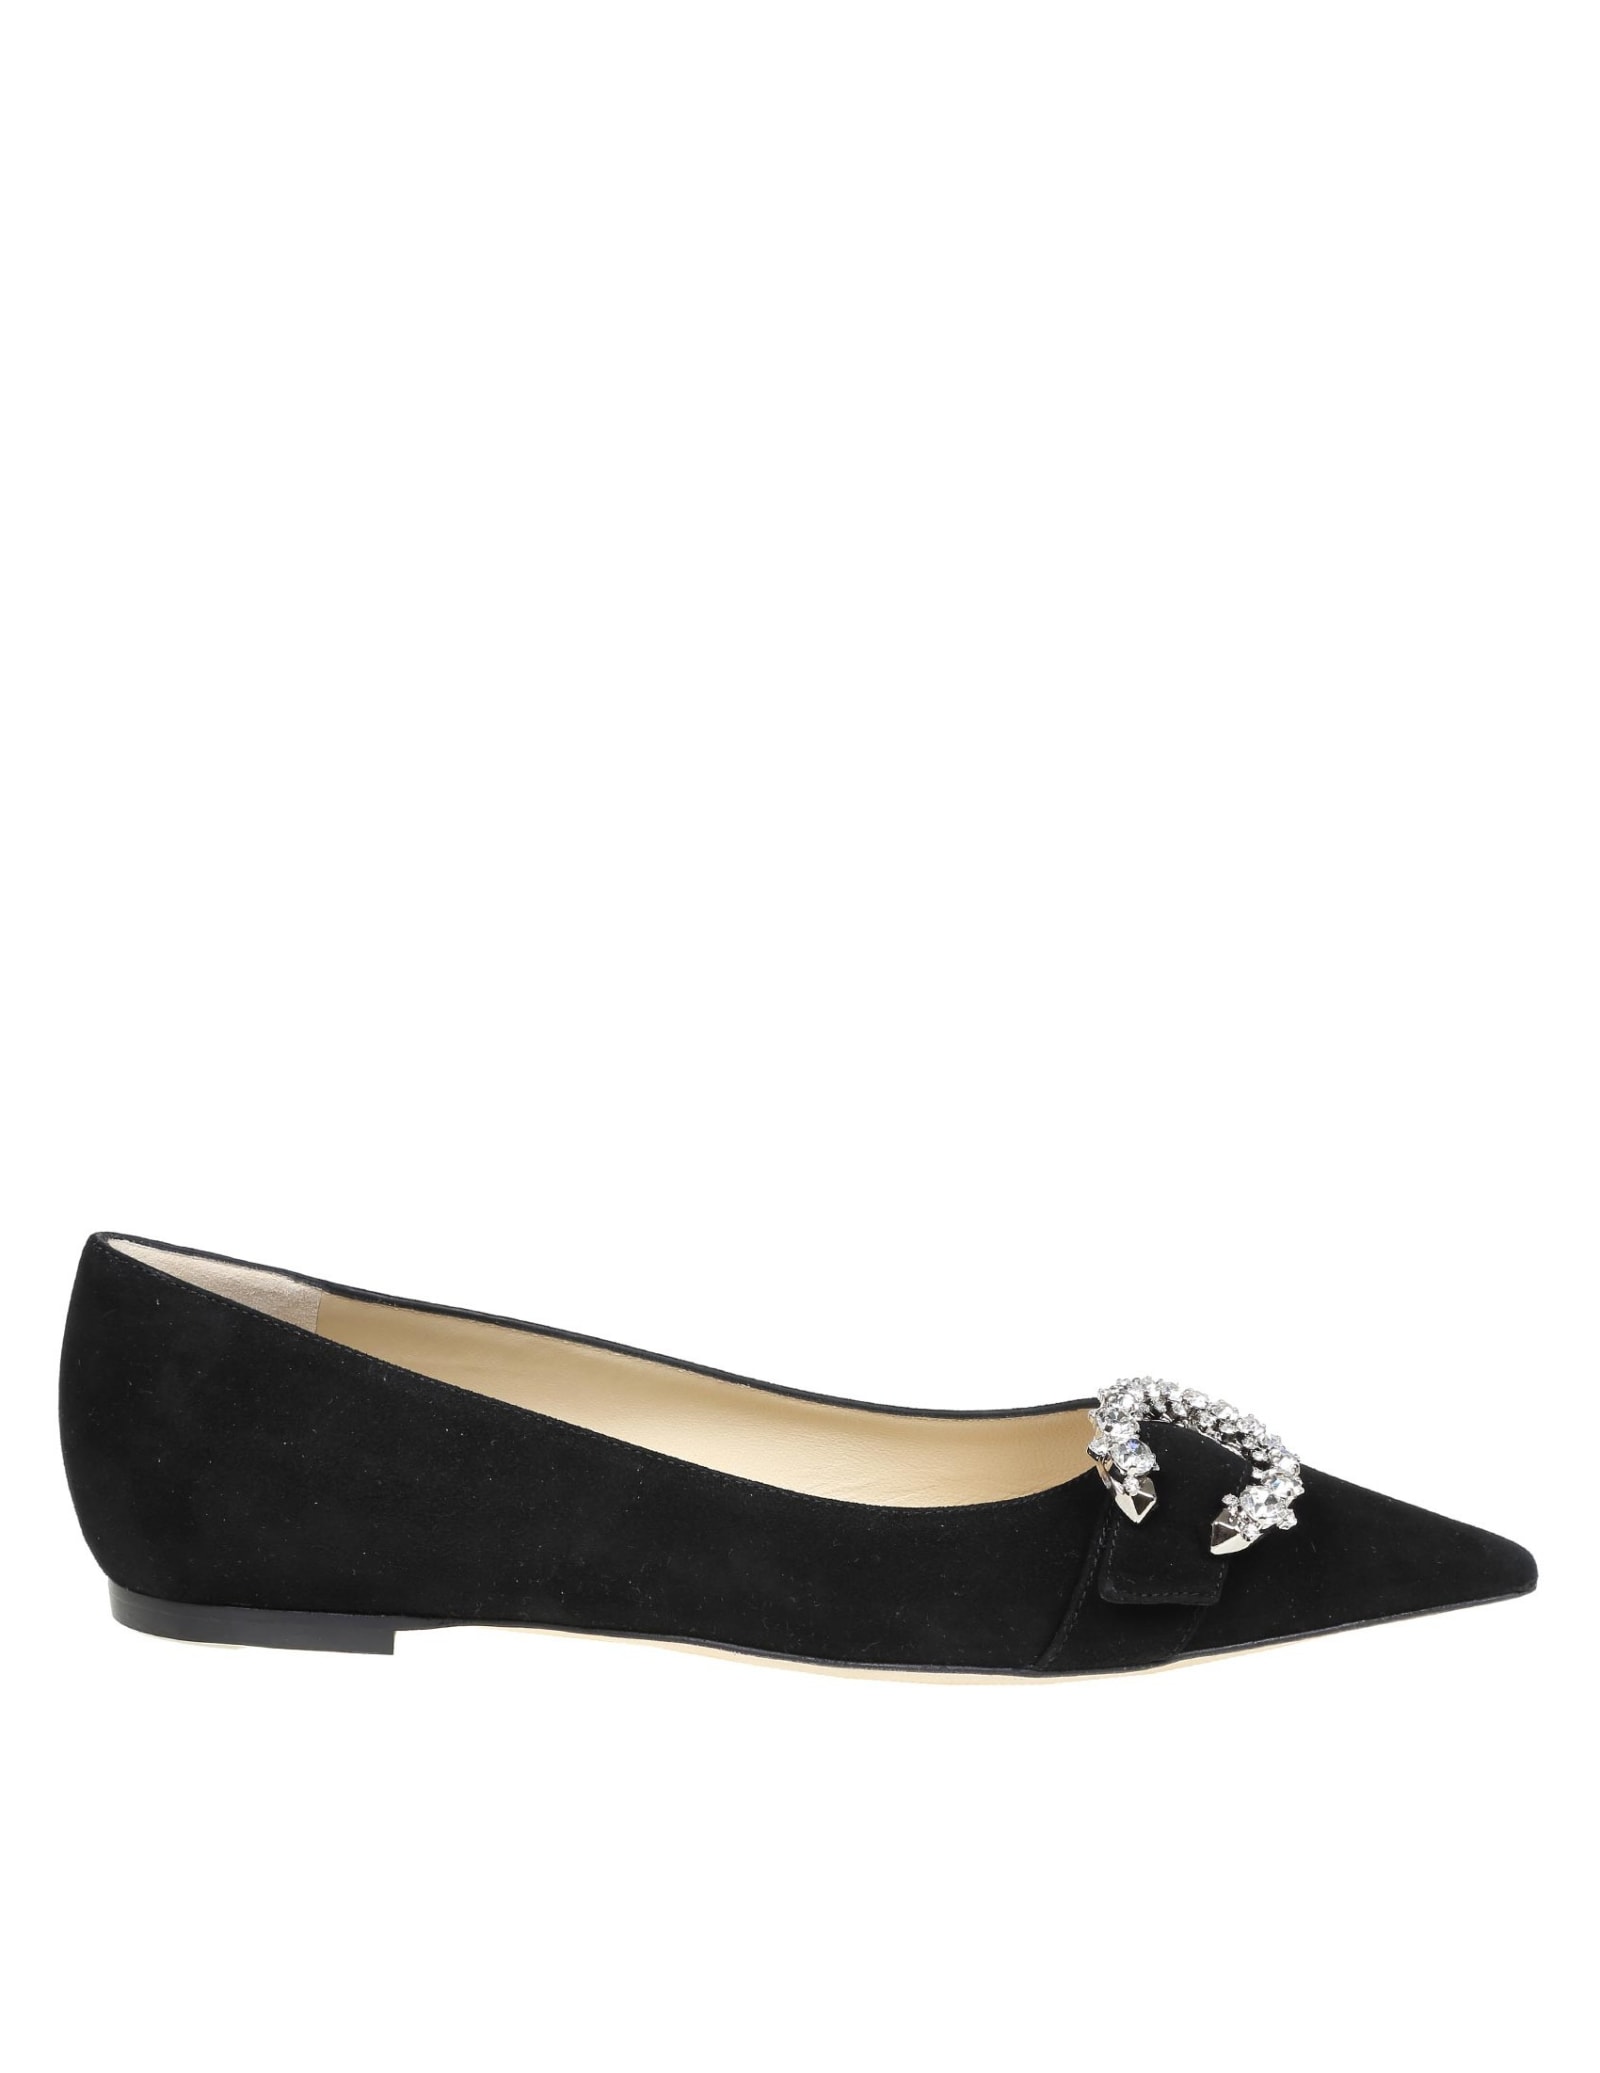 Buy Jimmy Choo Saresa Flat In Black Suede online, shop Jimmy Choo shoes with free shipping